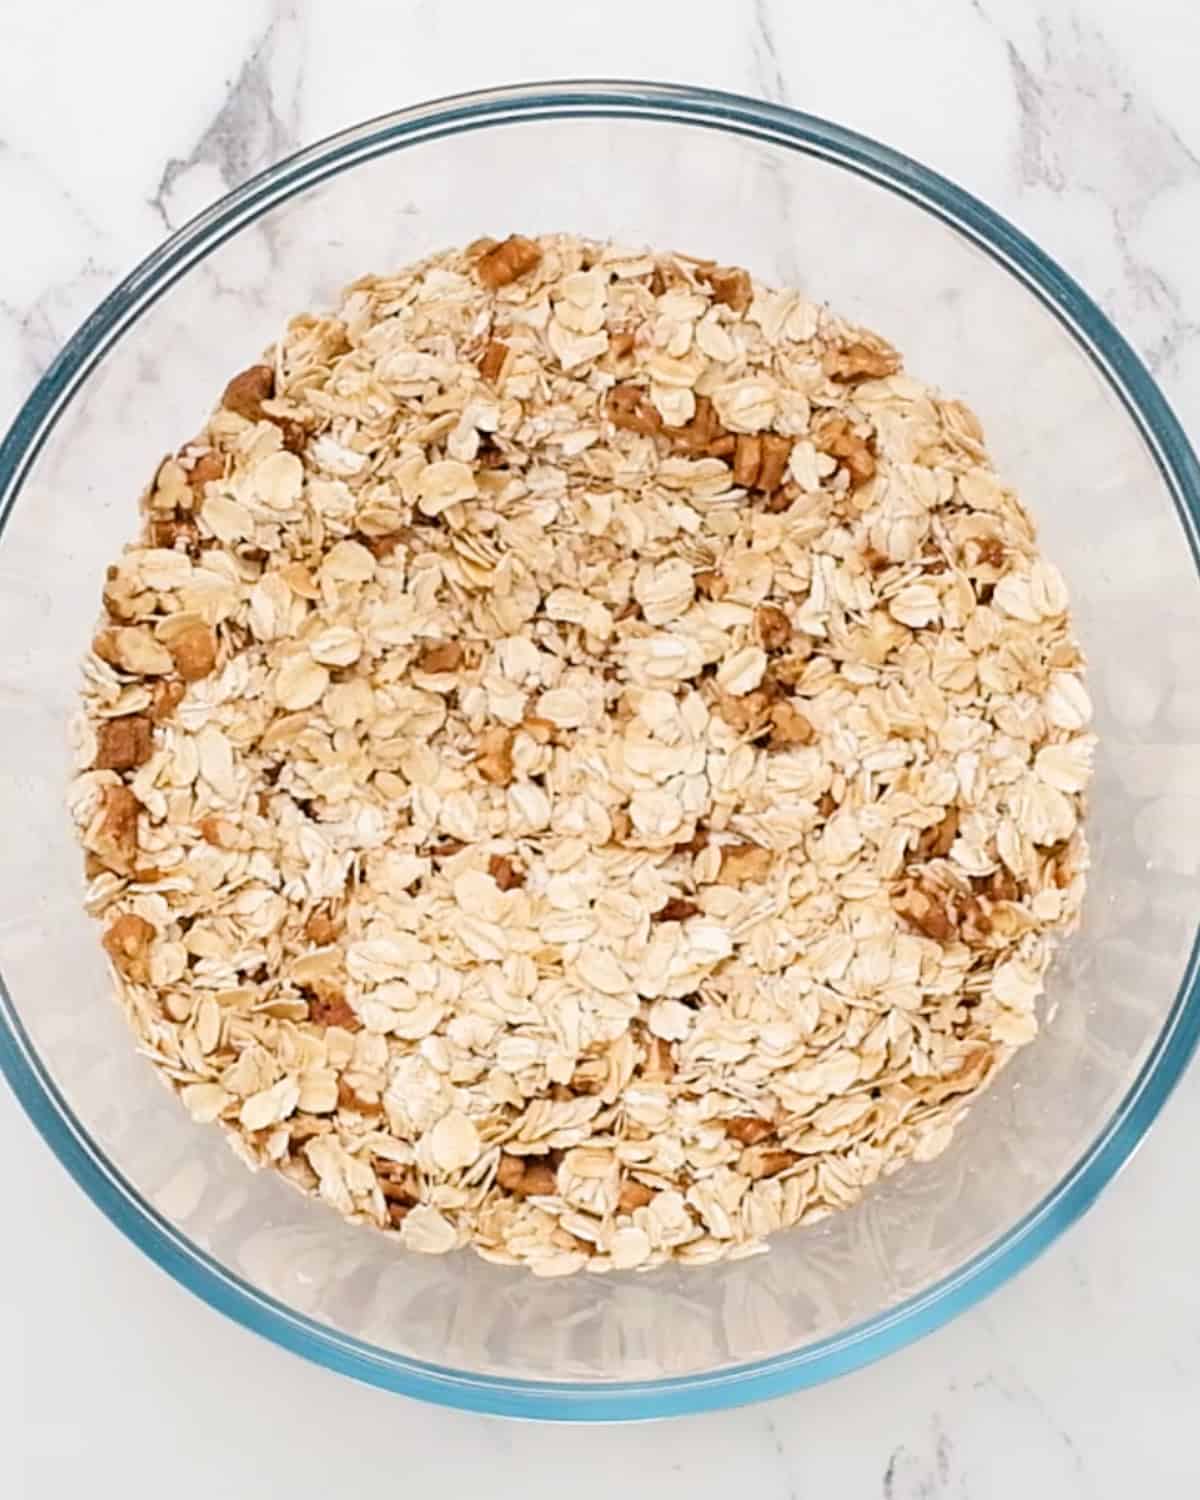 How to Make Homemade Granola - dry ingredients in a bowl after mixing